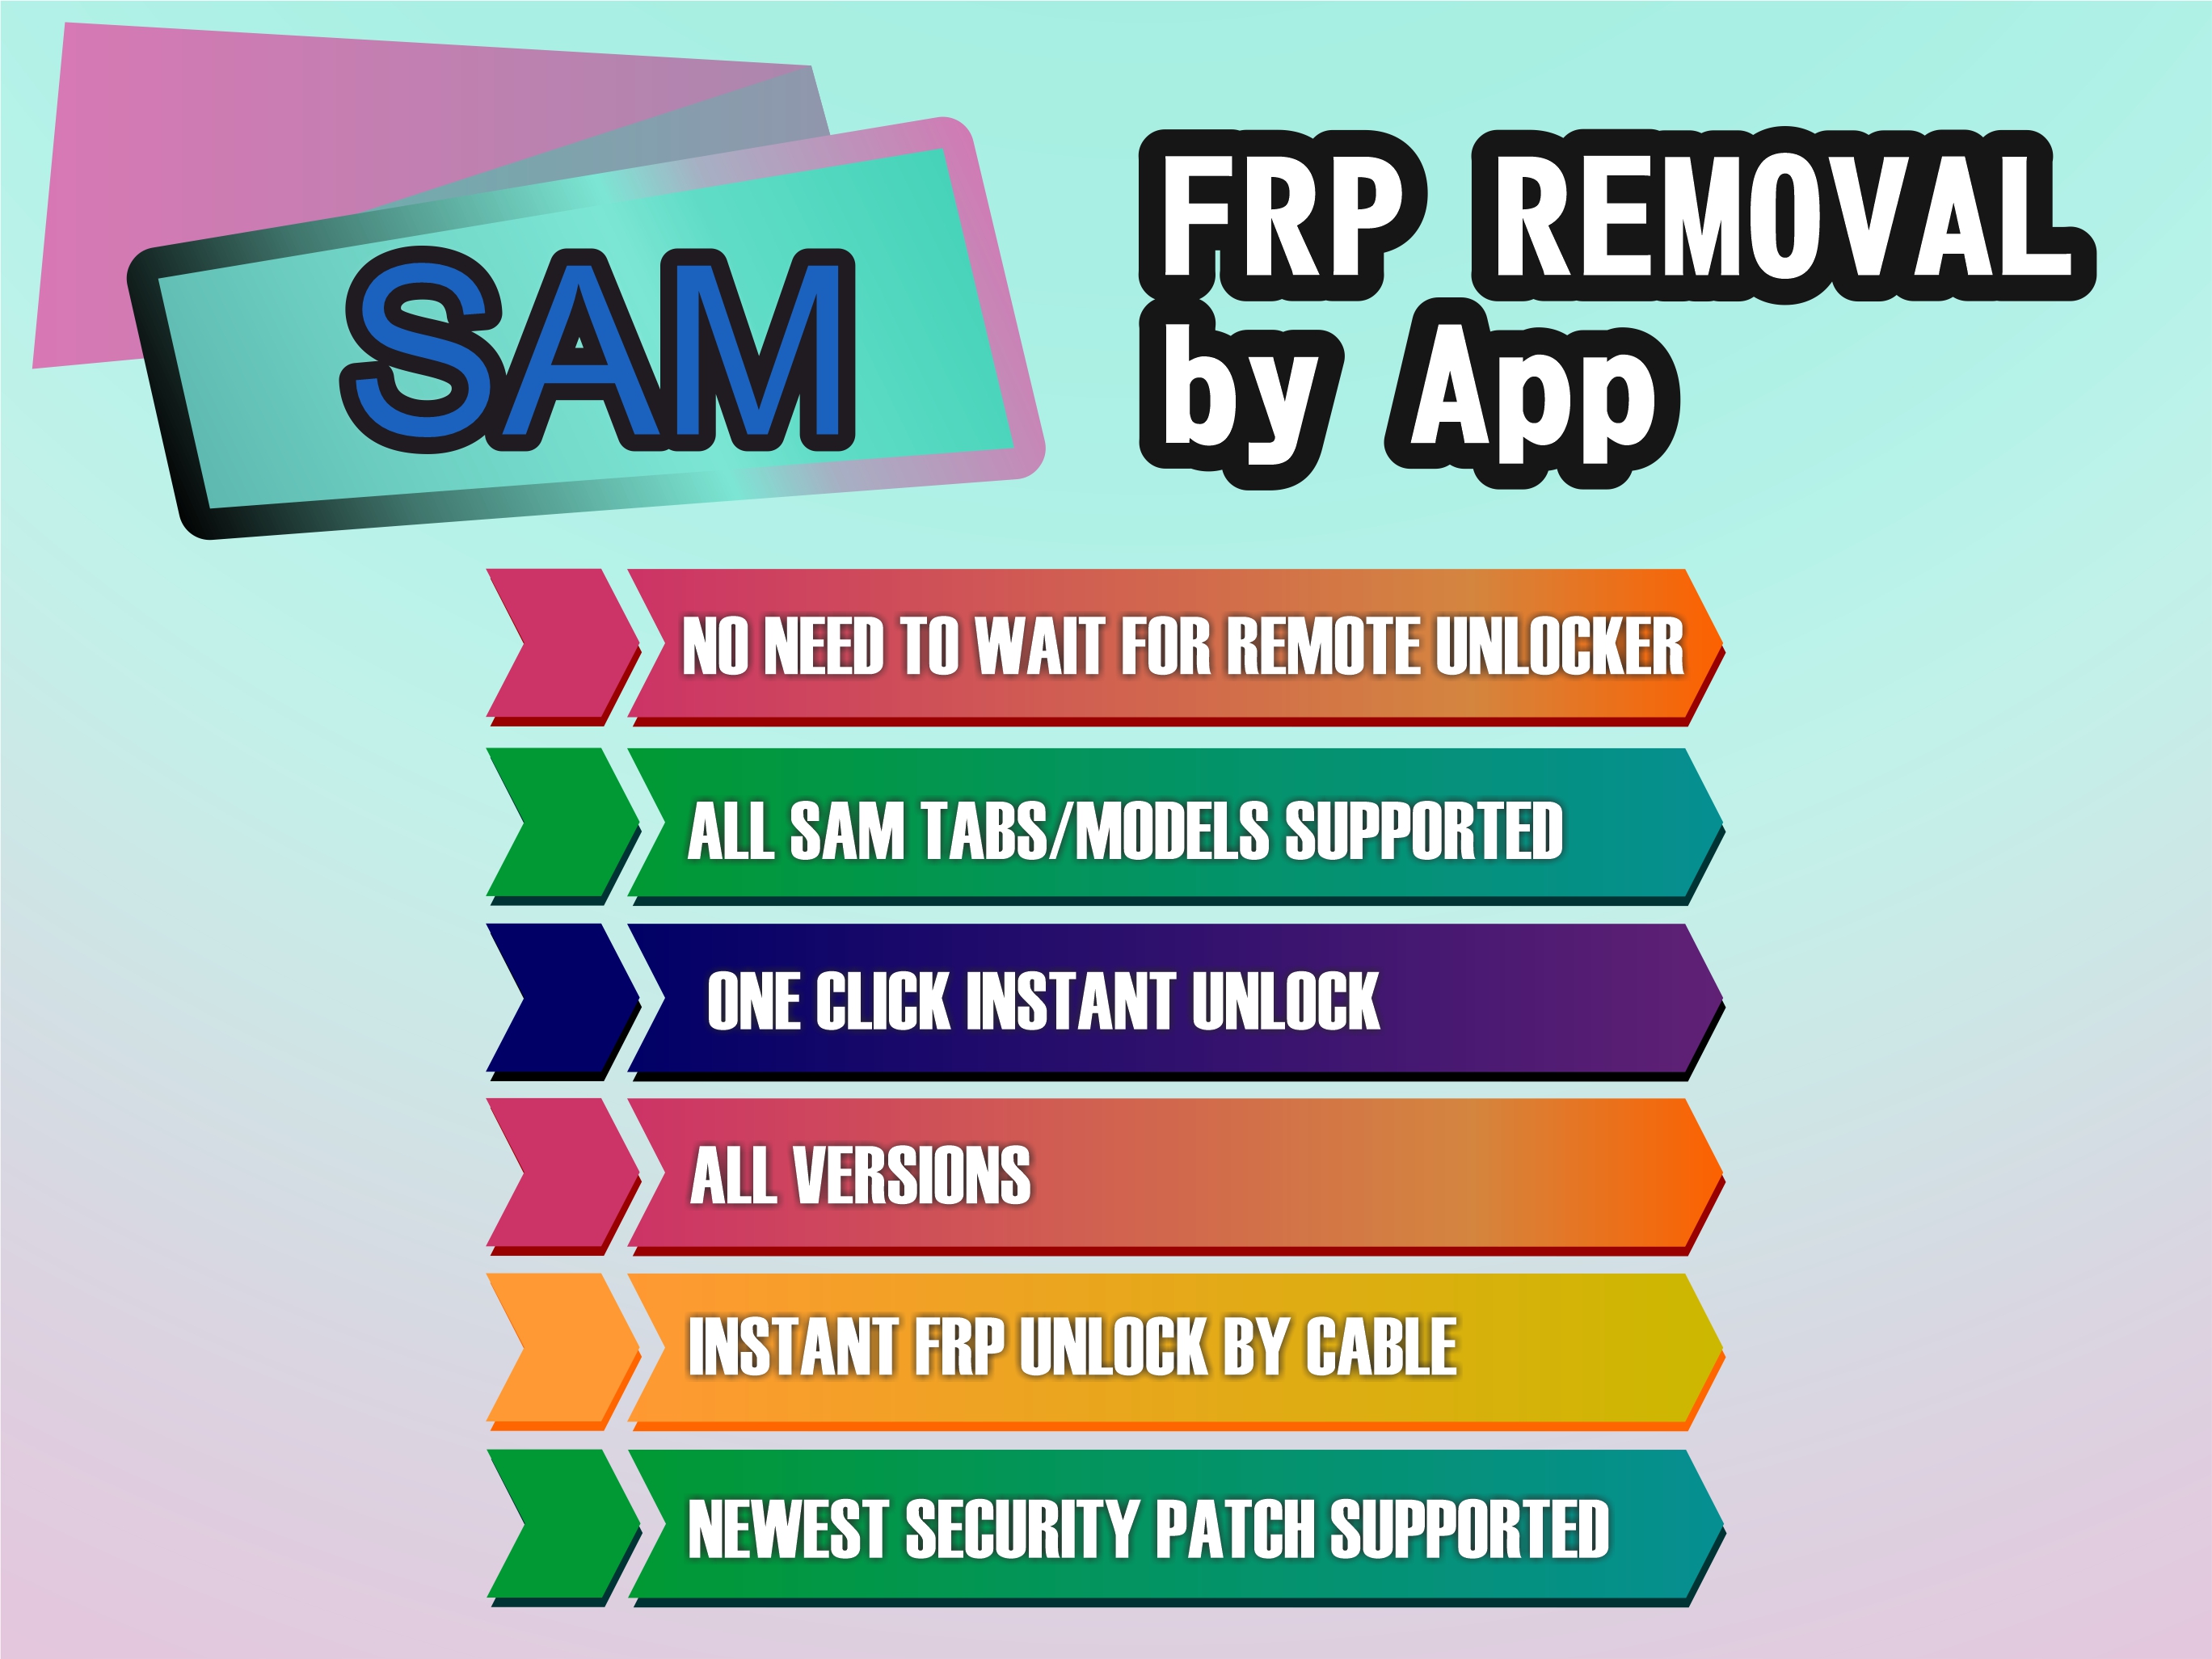 samsung frp remove tool , samsung frp remove instant by self, samsung  google account remove tool 